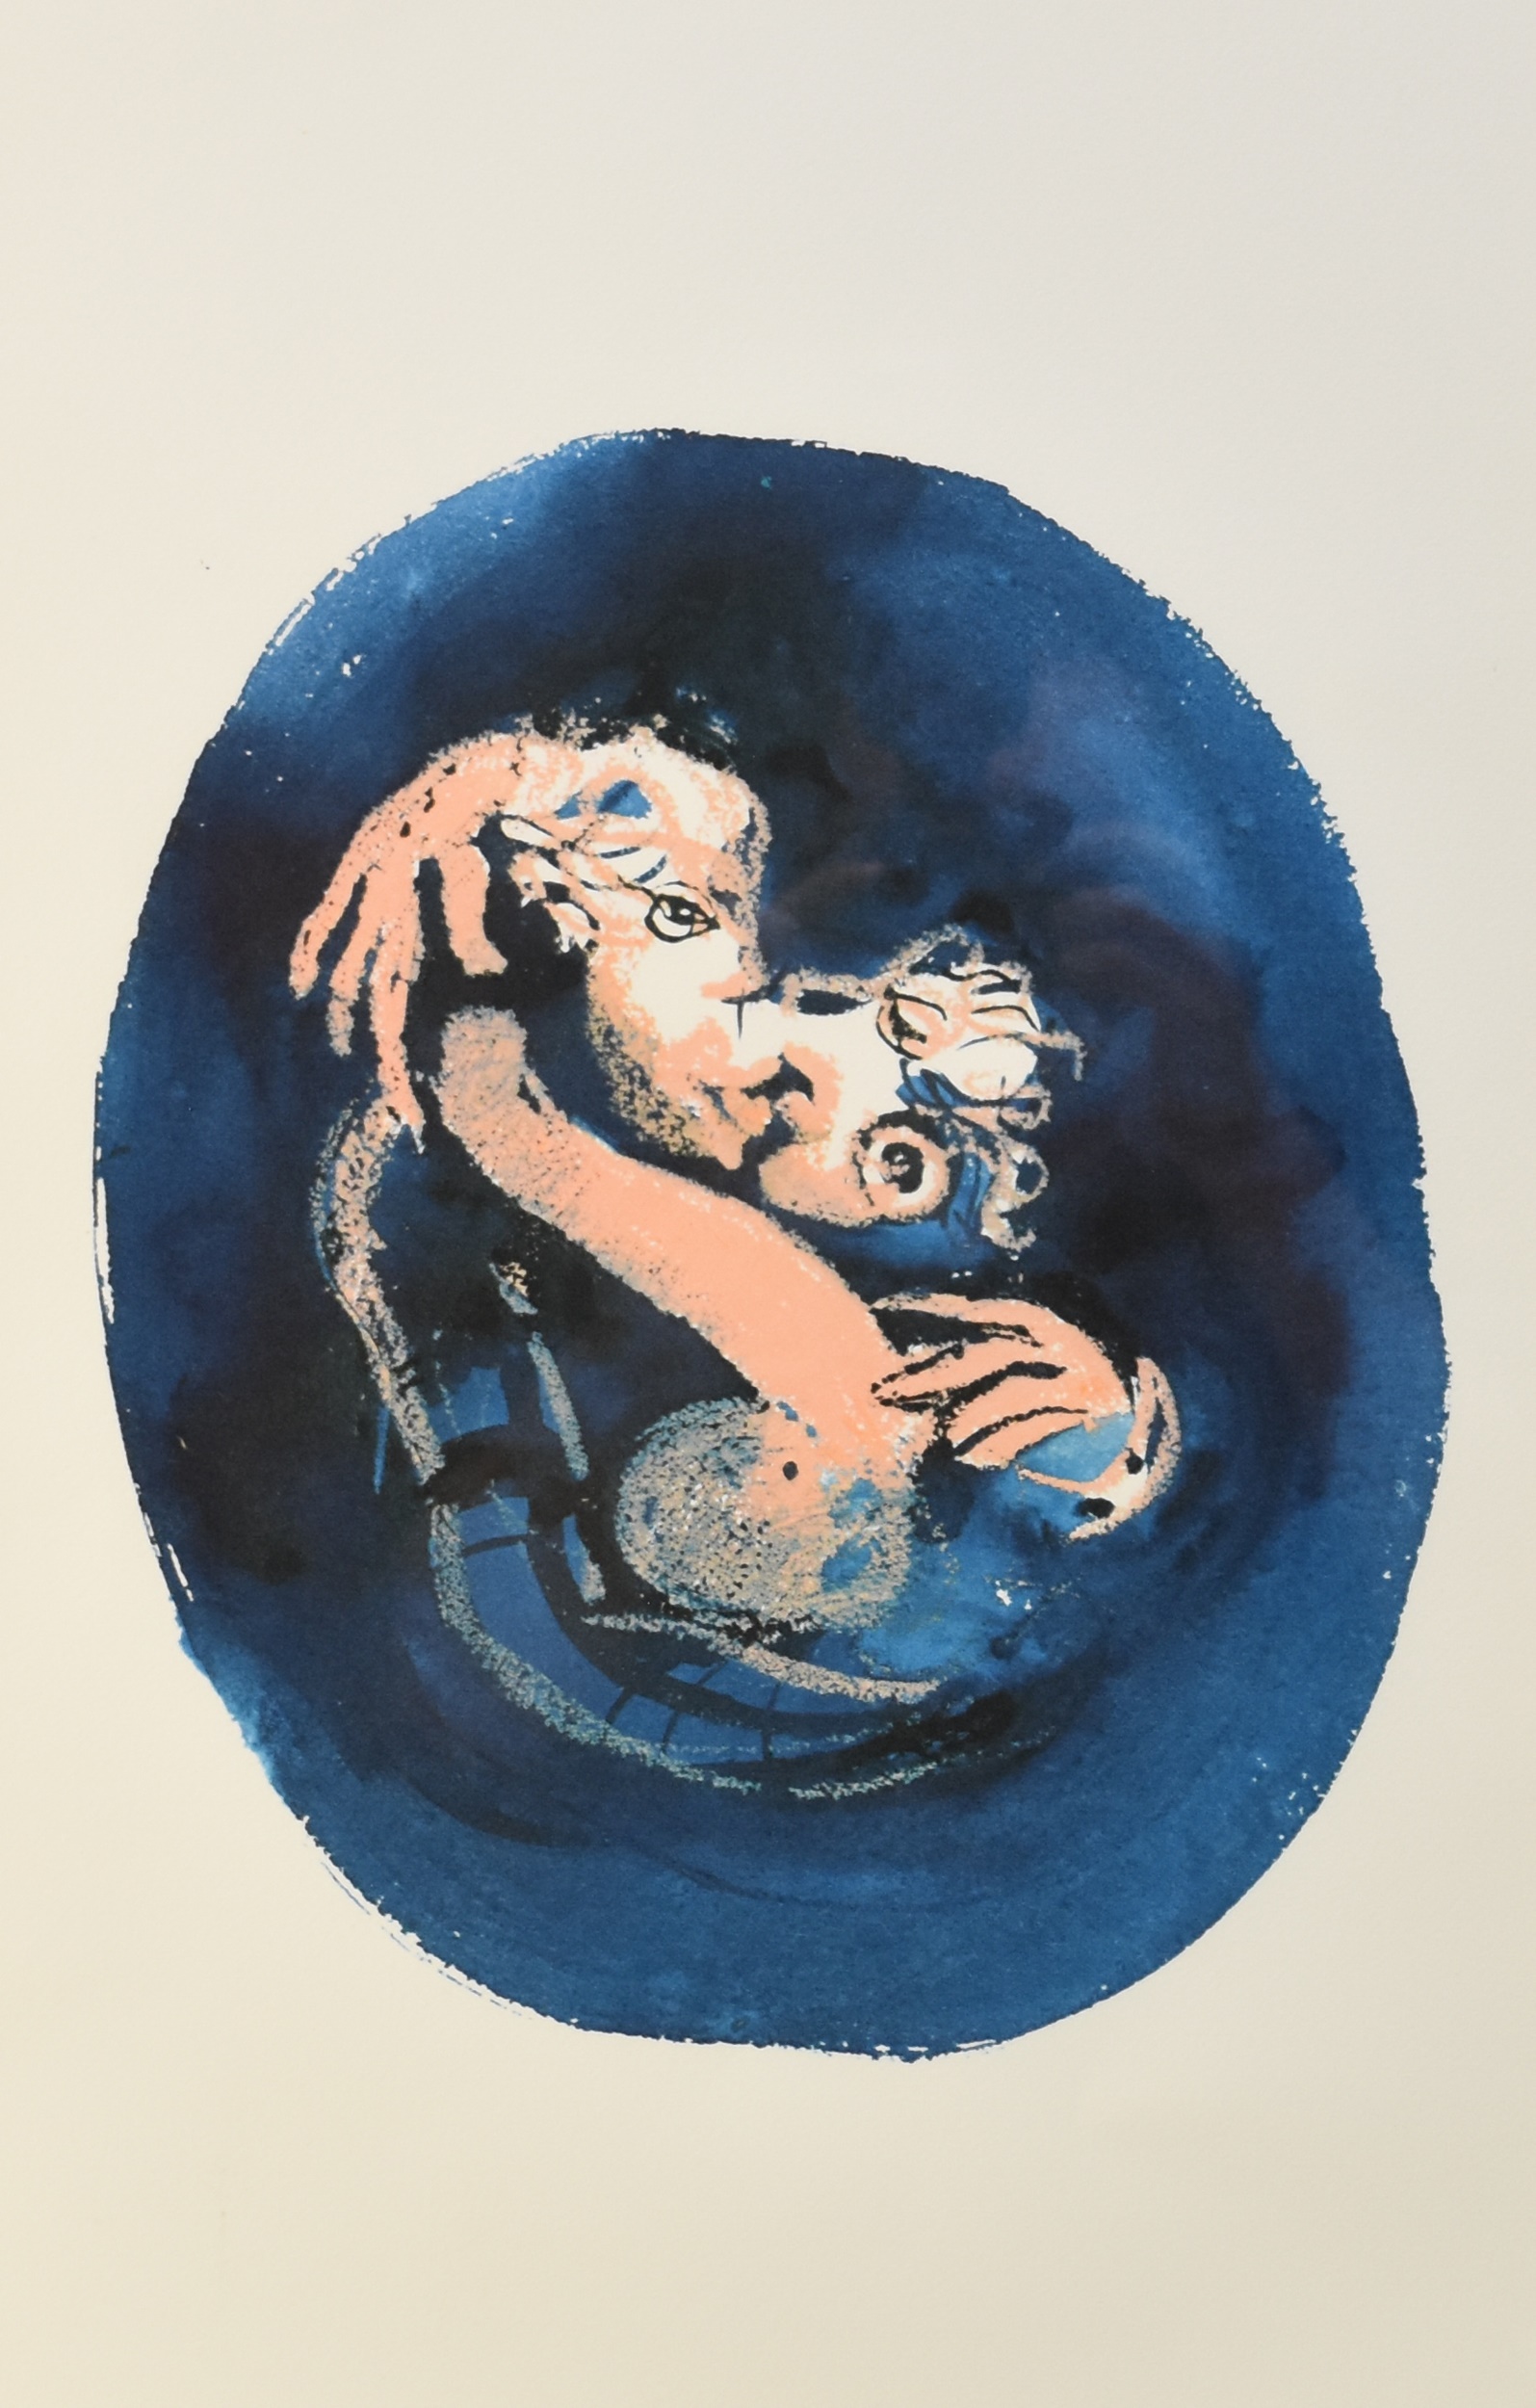 John Piper (British 1903-1992) Indian Love Poems, Embracing Couple, lithograph, measurements 30 x